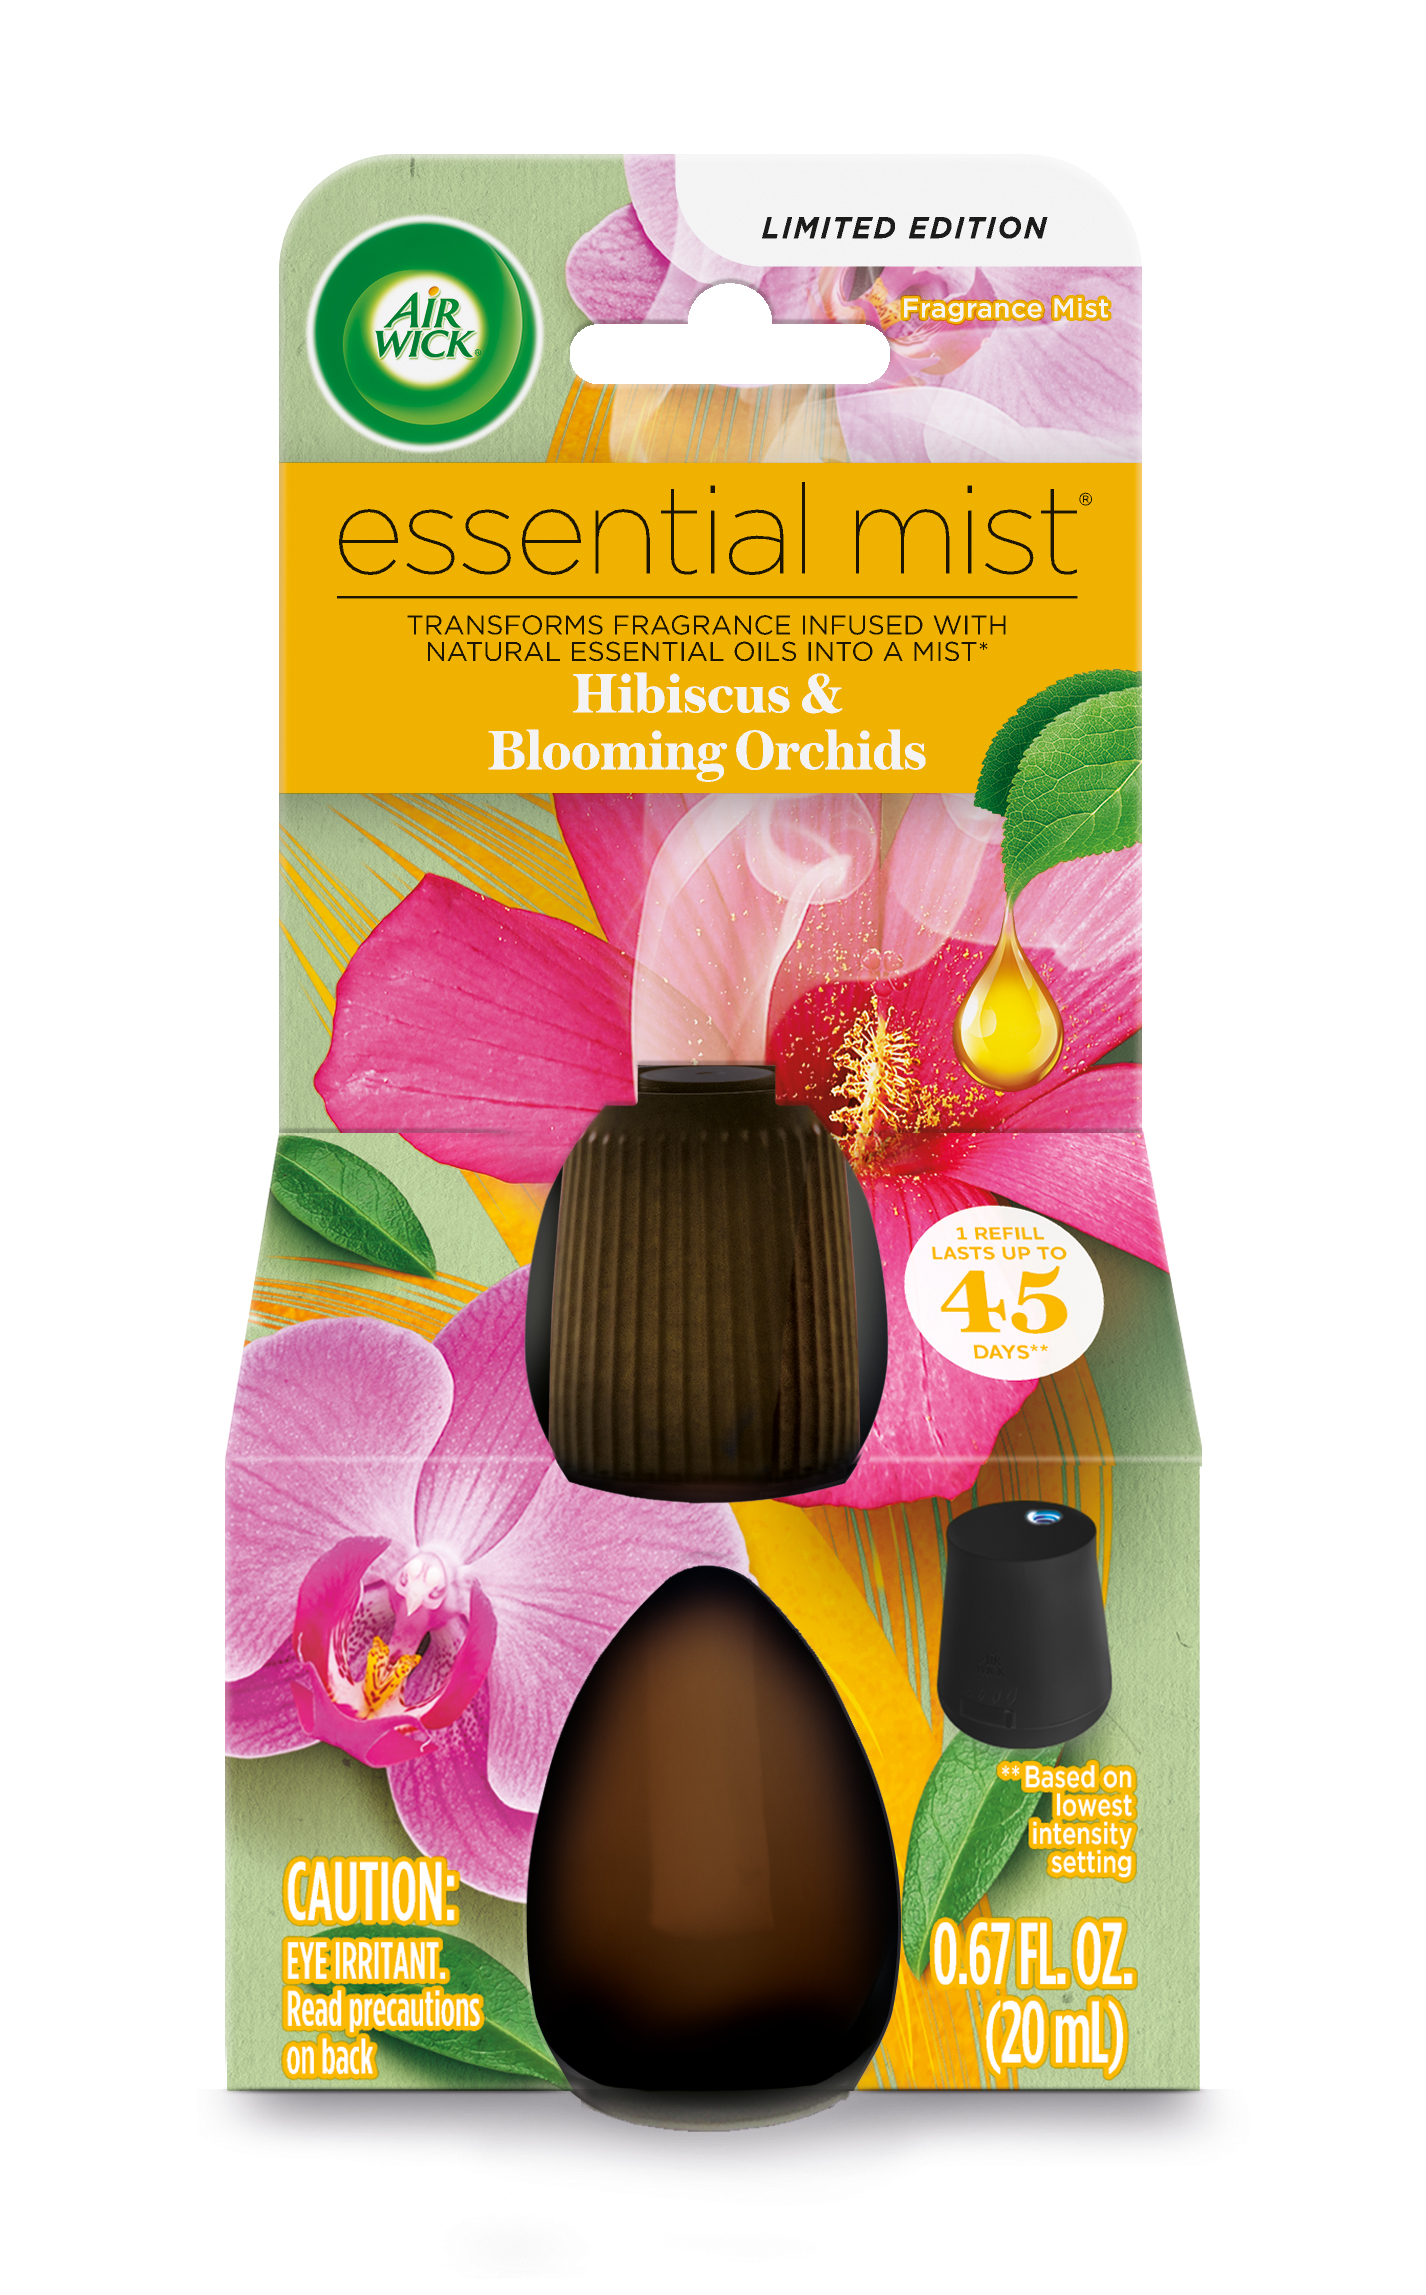 AIR WICK® Essential Mist - Hibiscus & Blooming Orchids